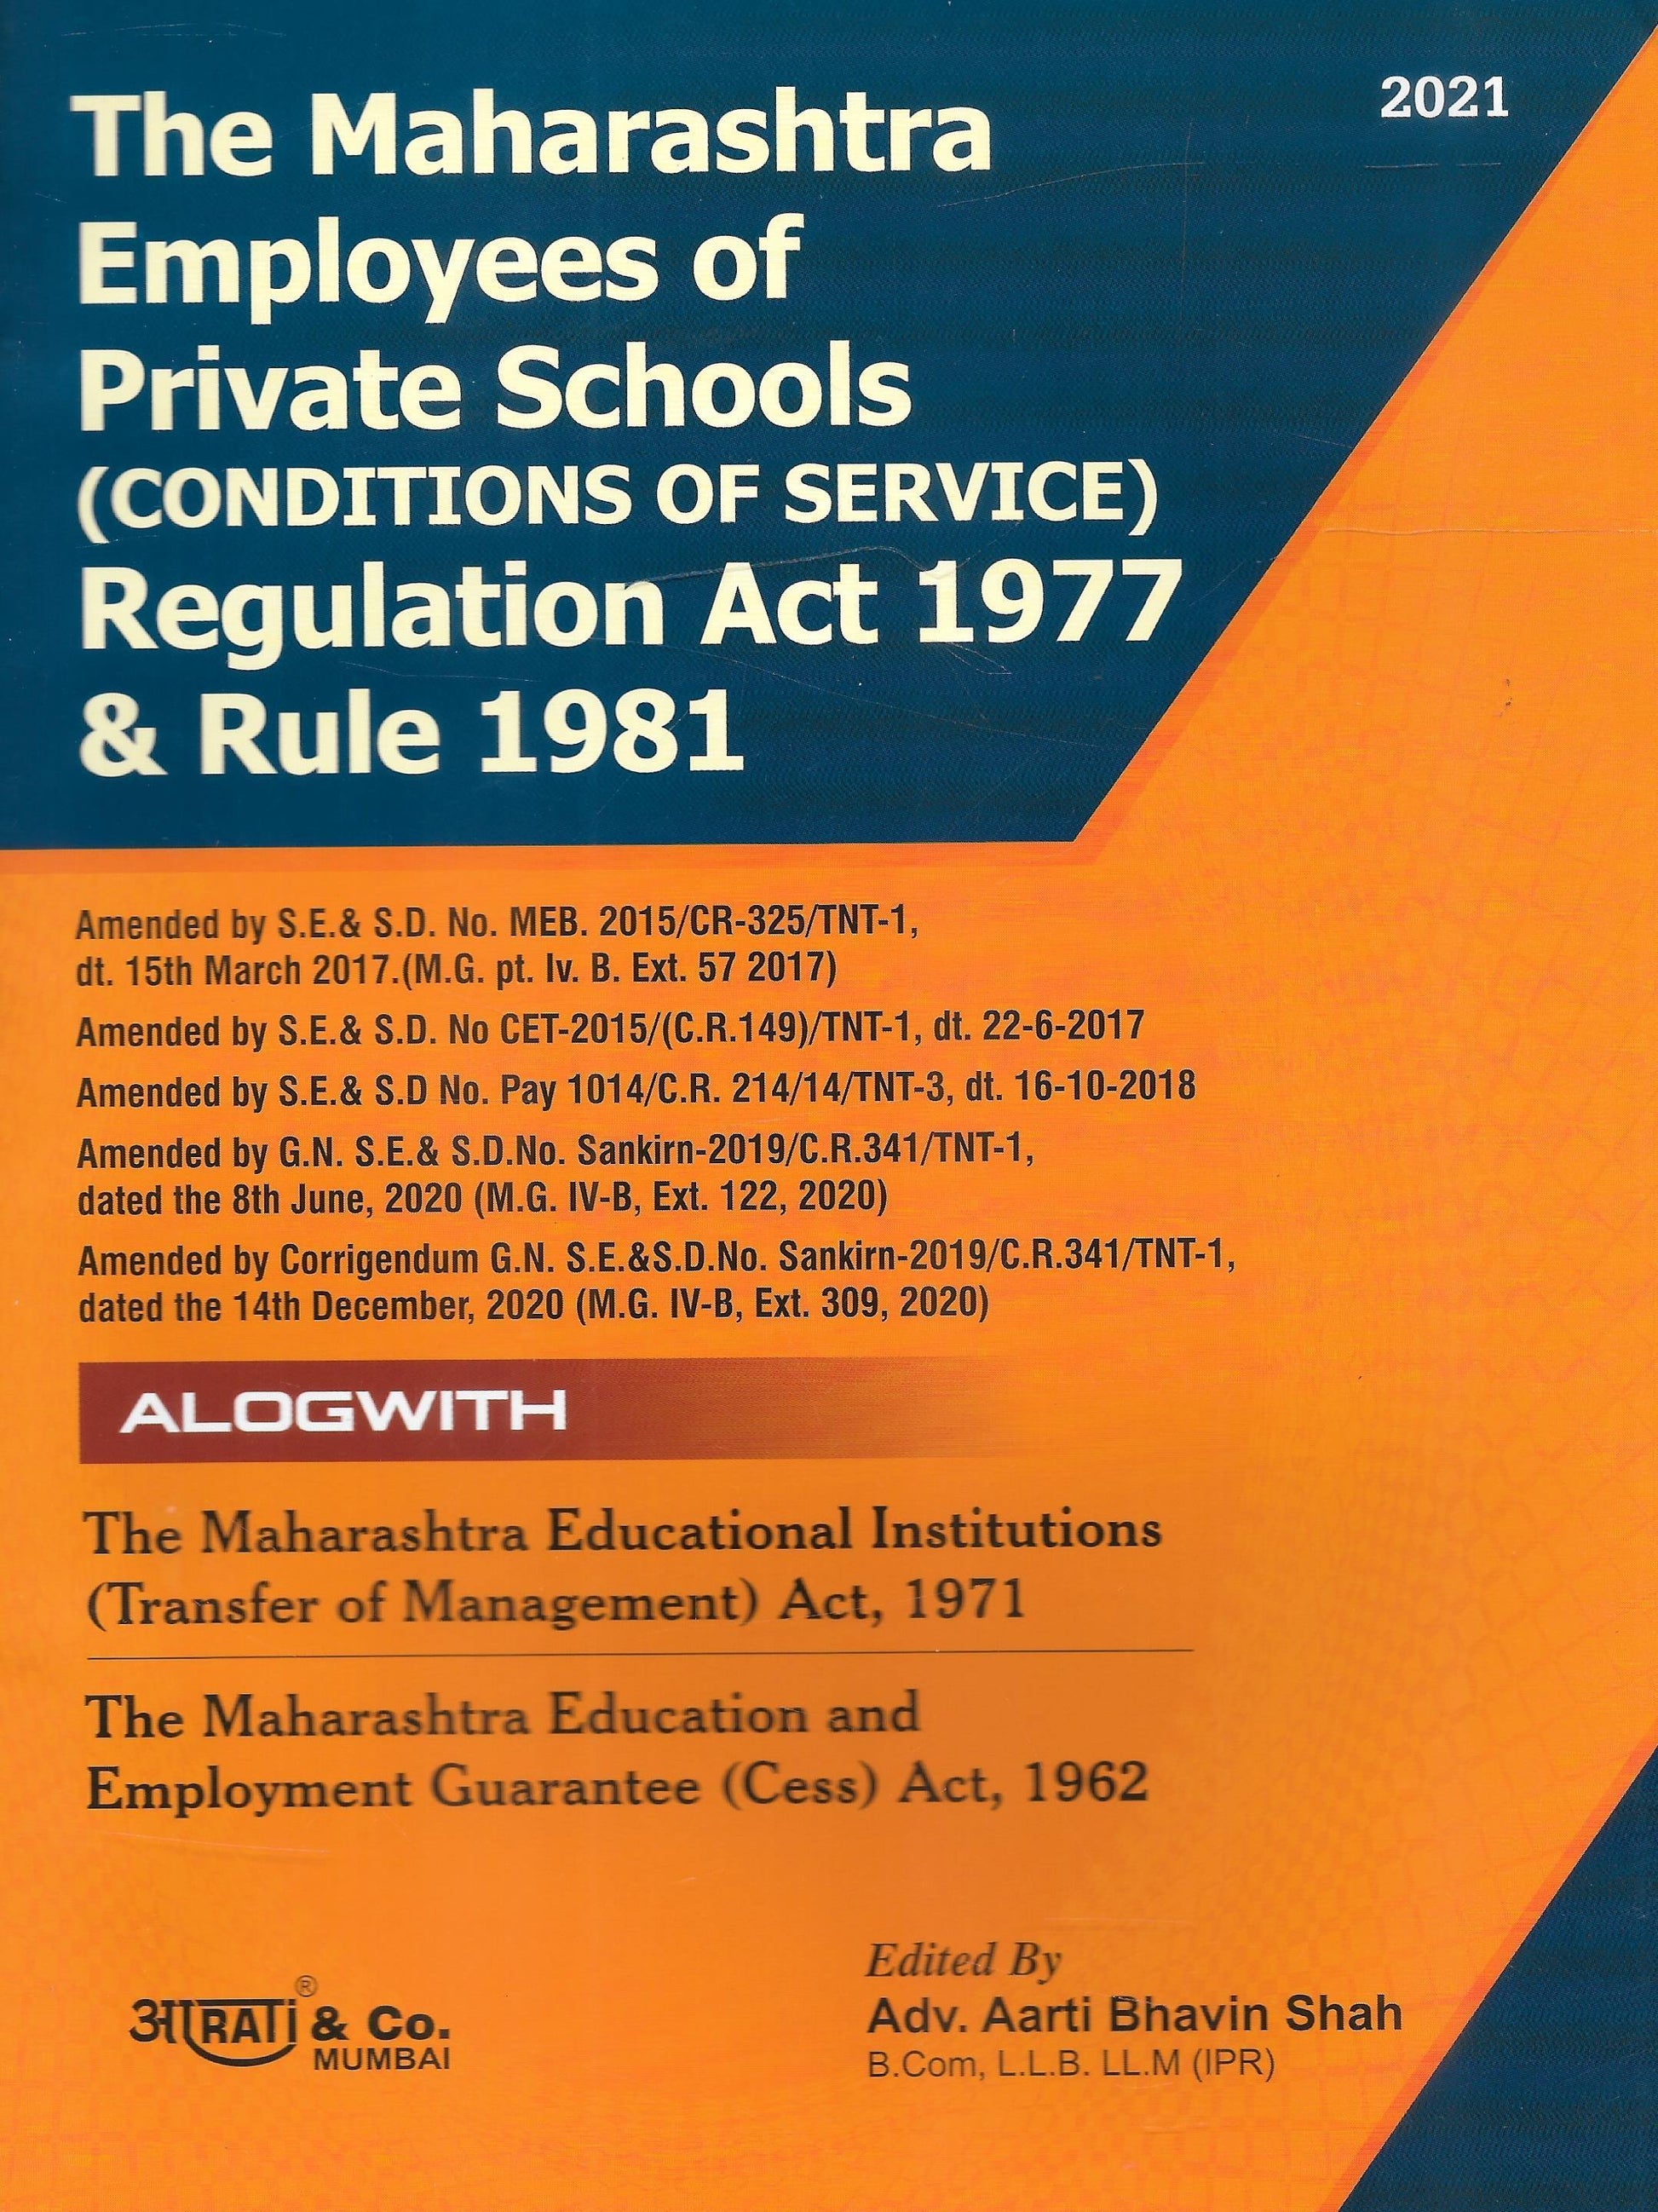 The Maharashtra Employees of Private Schools (Conditions of Service) Regulation Act 1977 and Rules 1981 - M&J Services